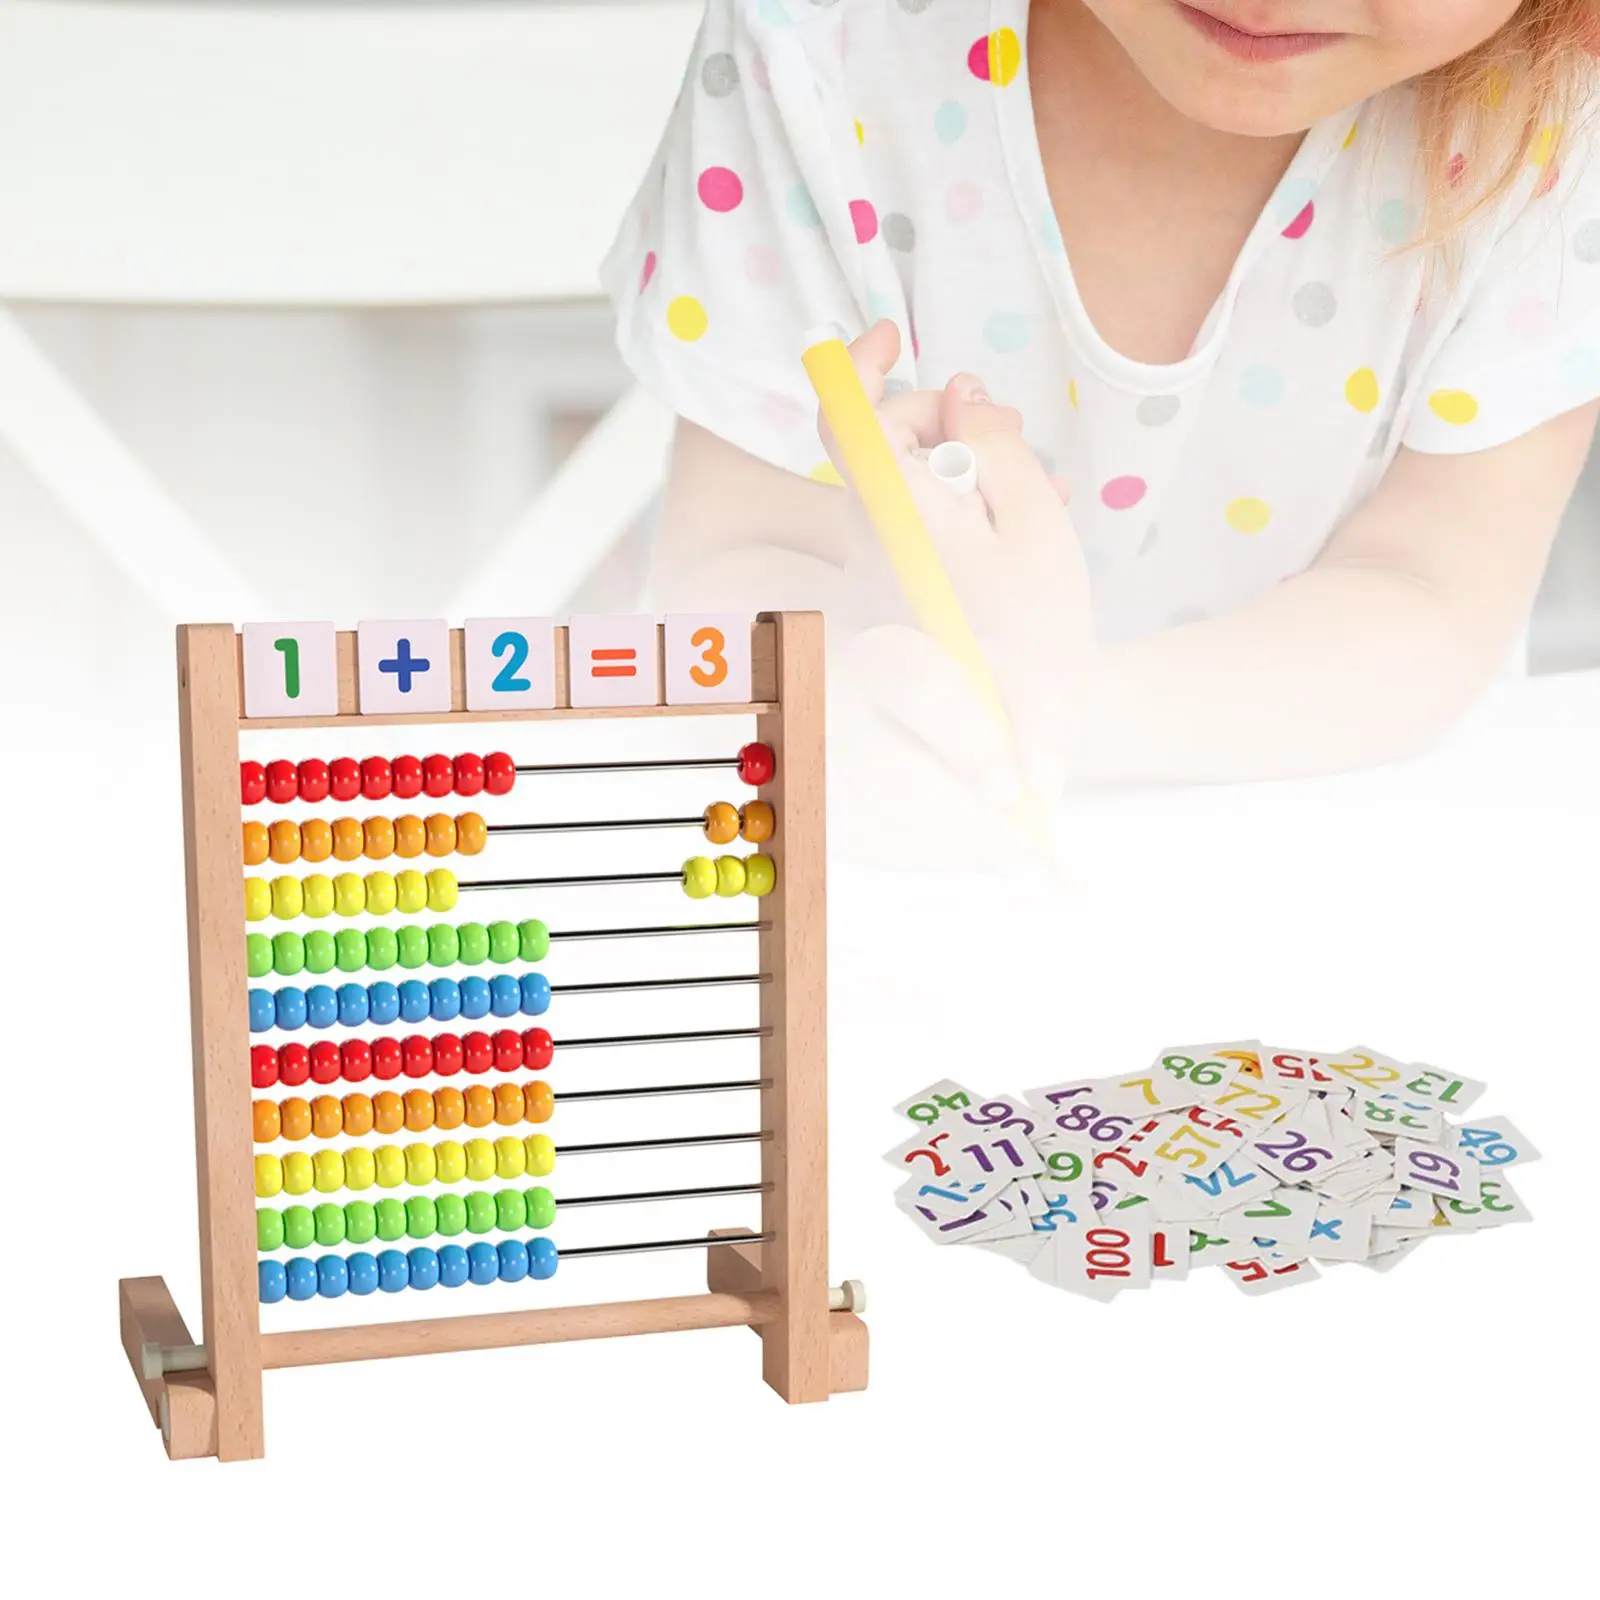 Classic Wooden Abacus Montessori Ten Frame Set Bead Arithmetic Abacus Math Manipulatives Educational Toy for Children Kids